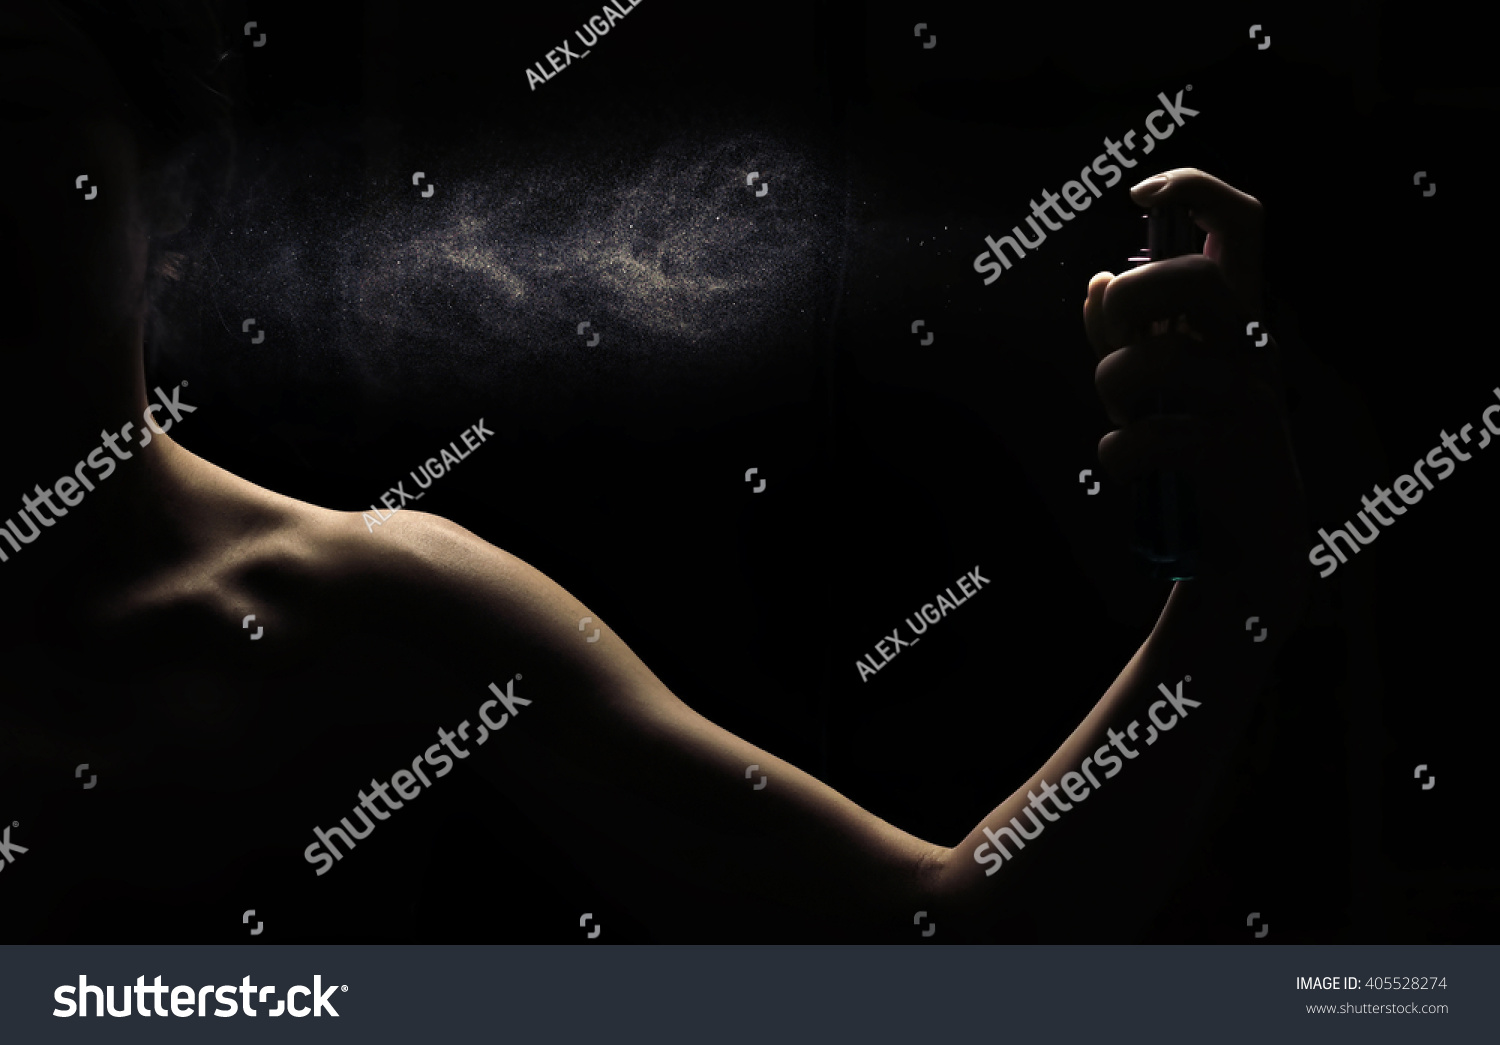 Woman's perfume in the hand on black background  #405528274